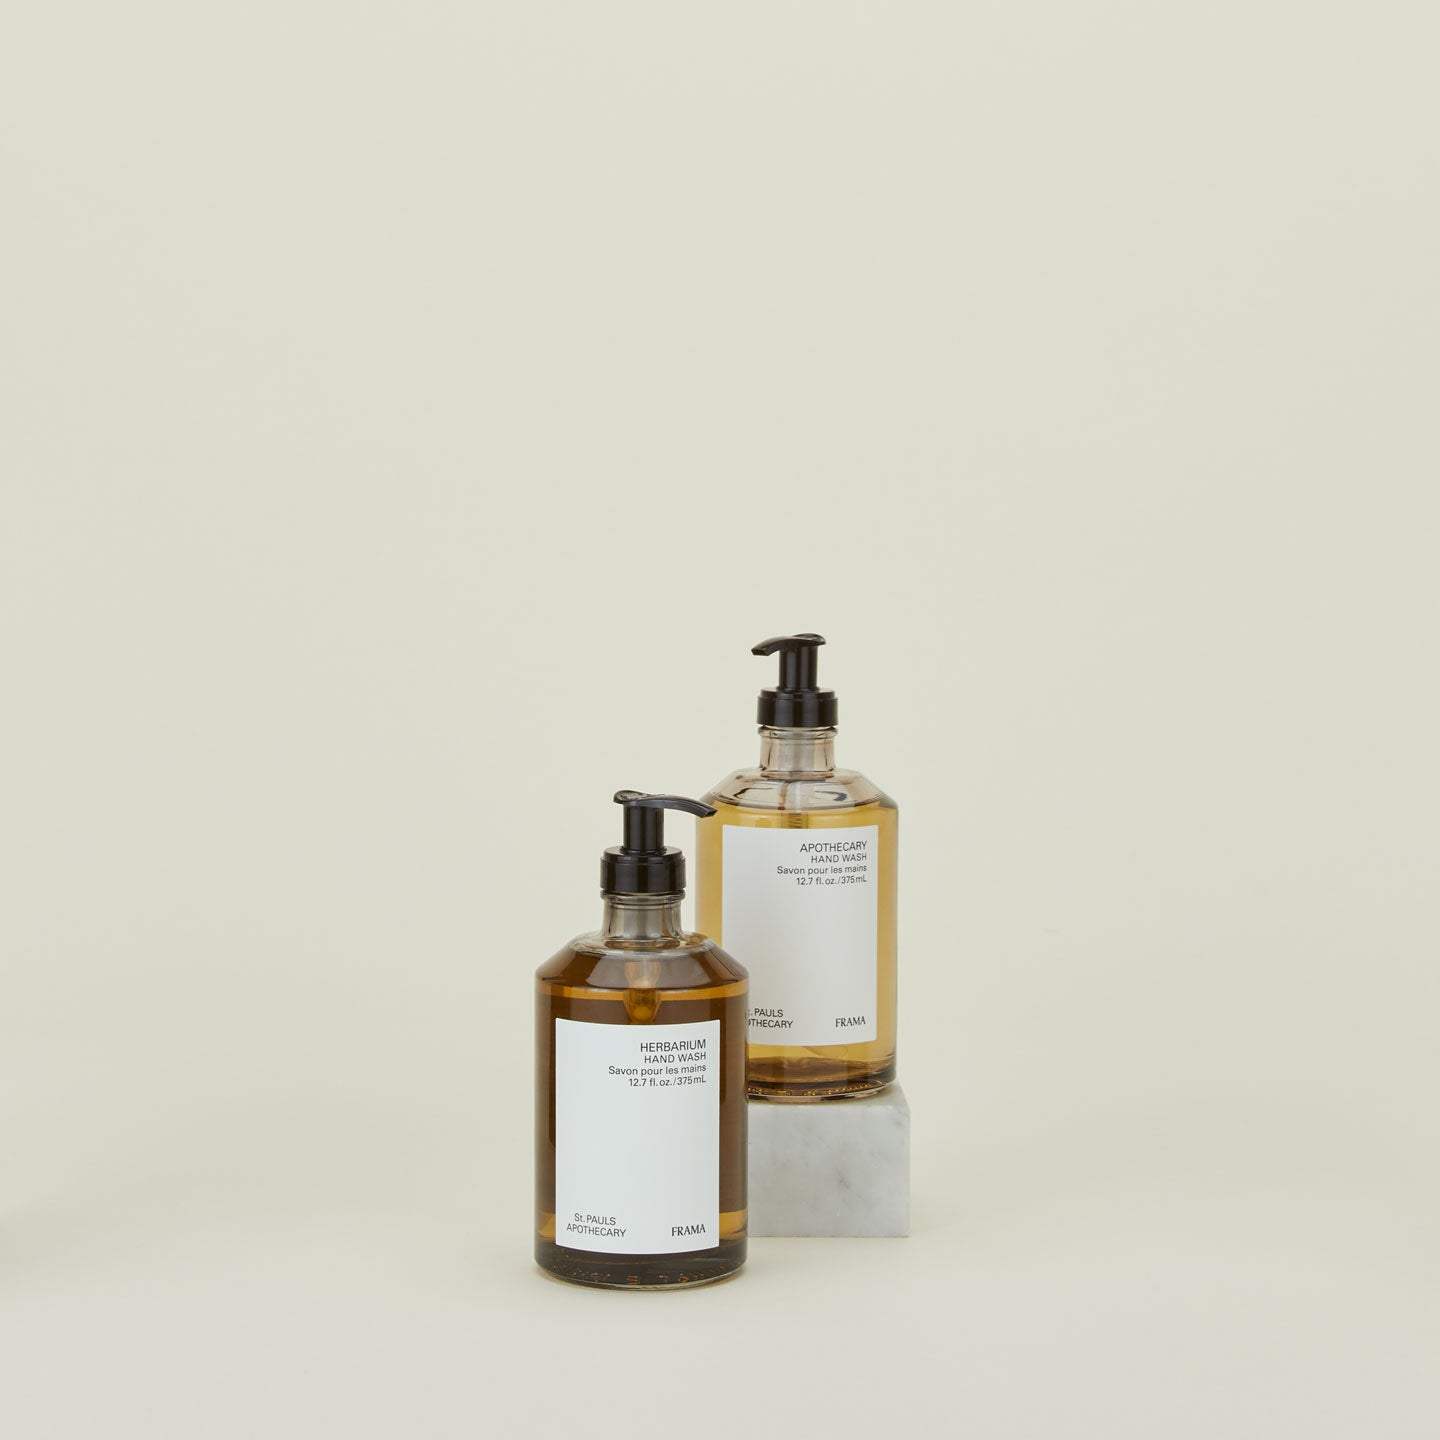 A pair of scented liquid hand washes.